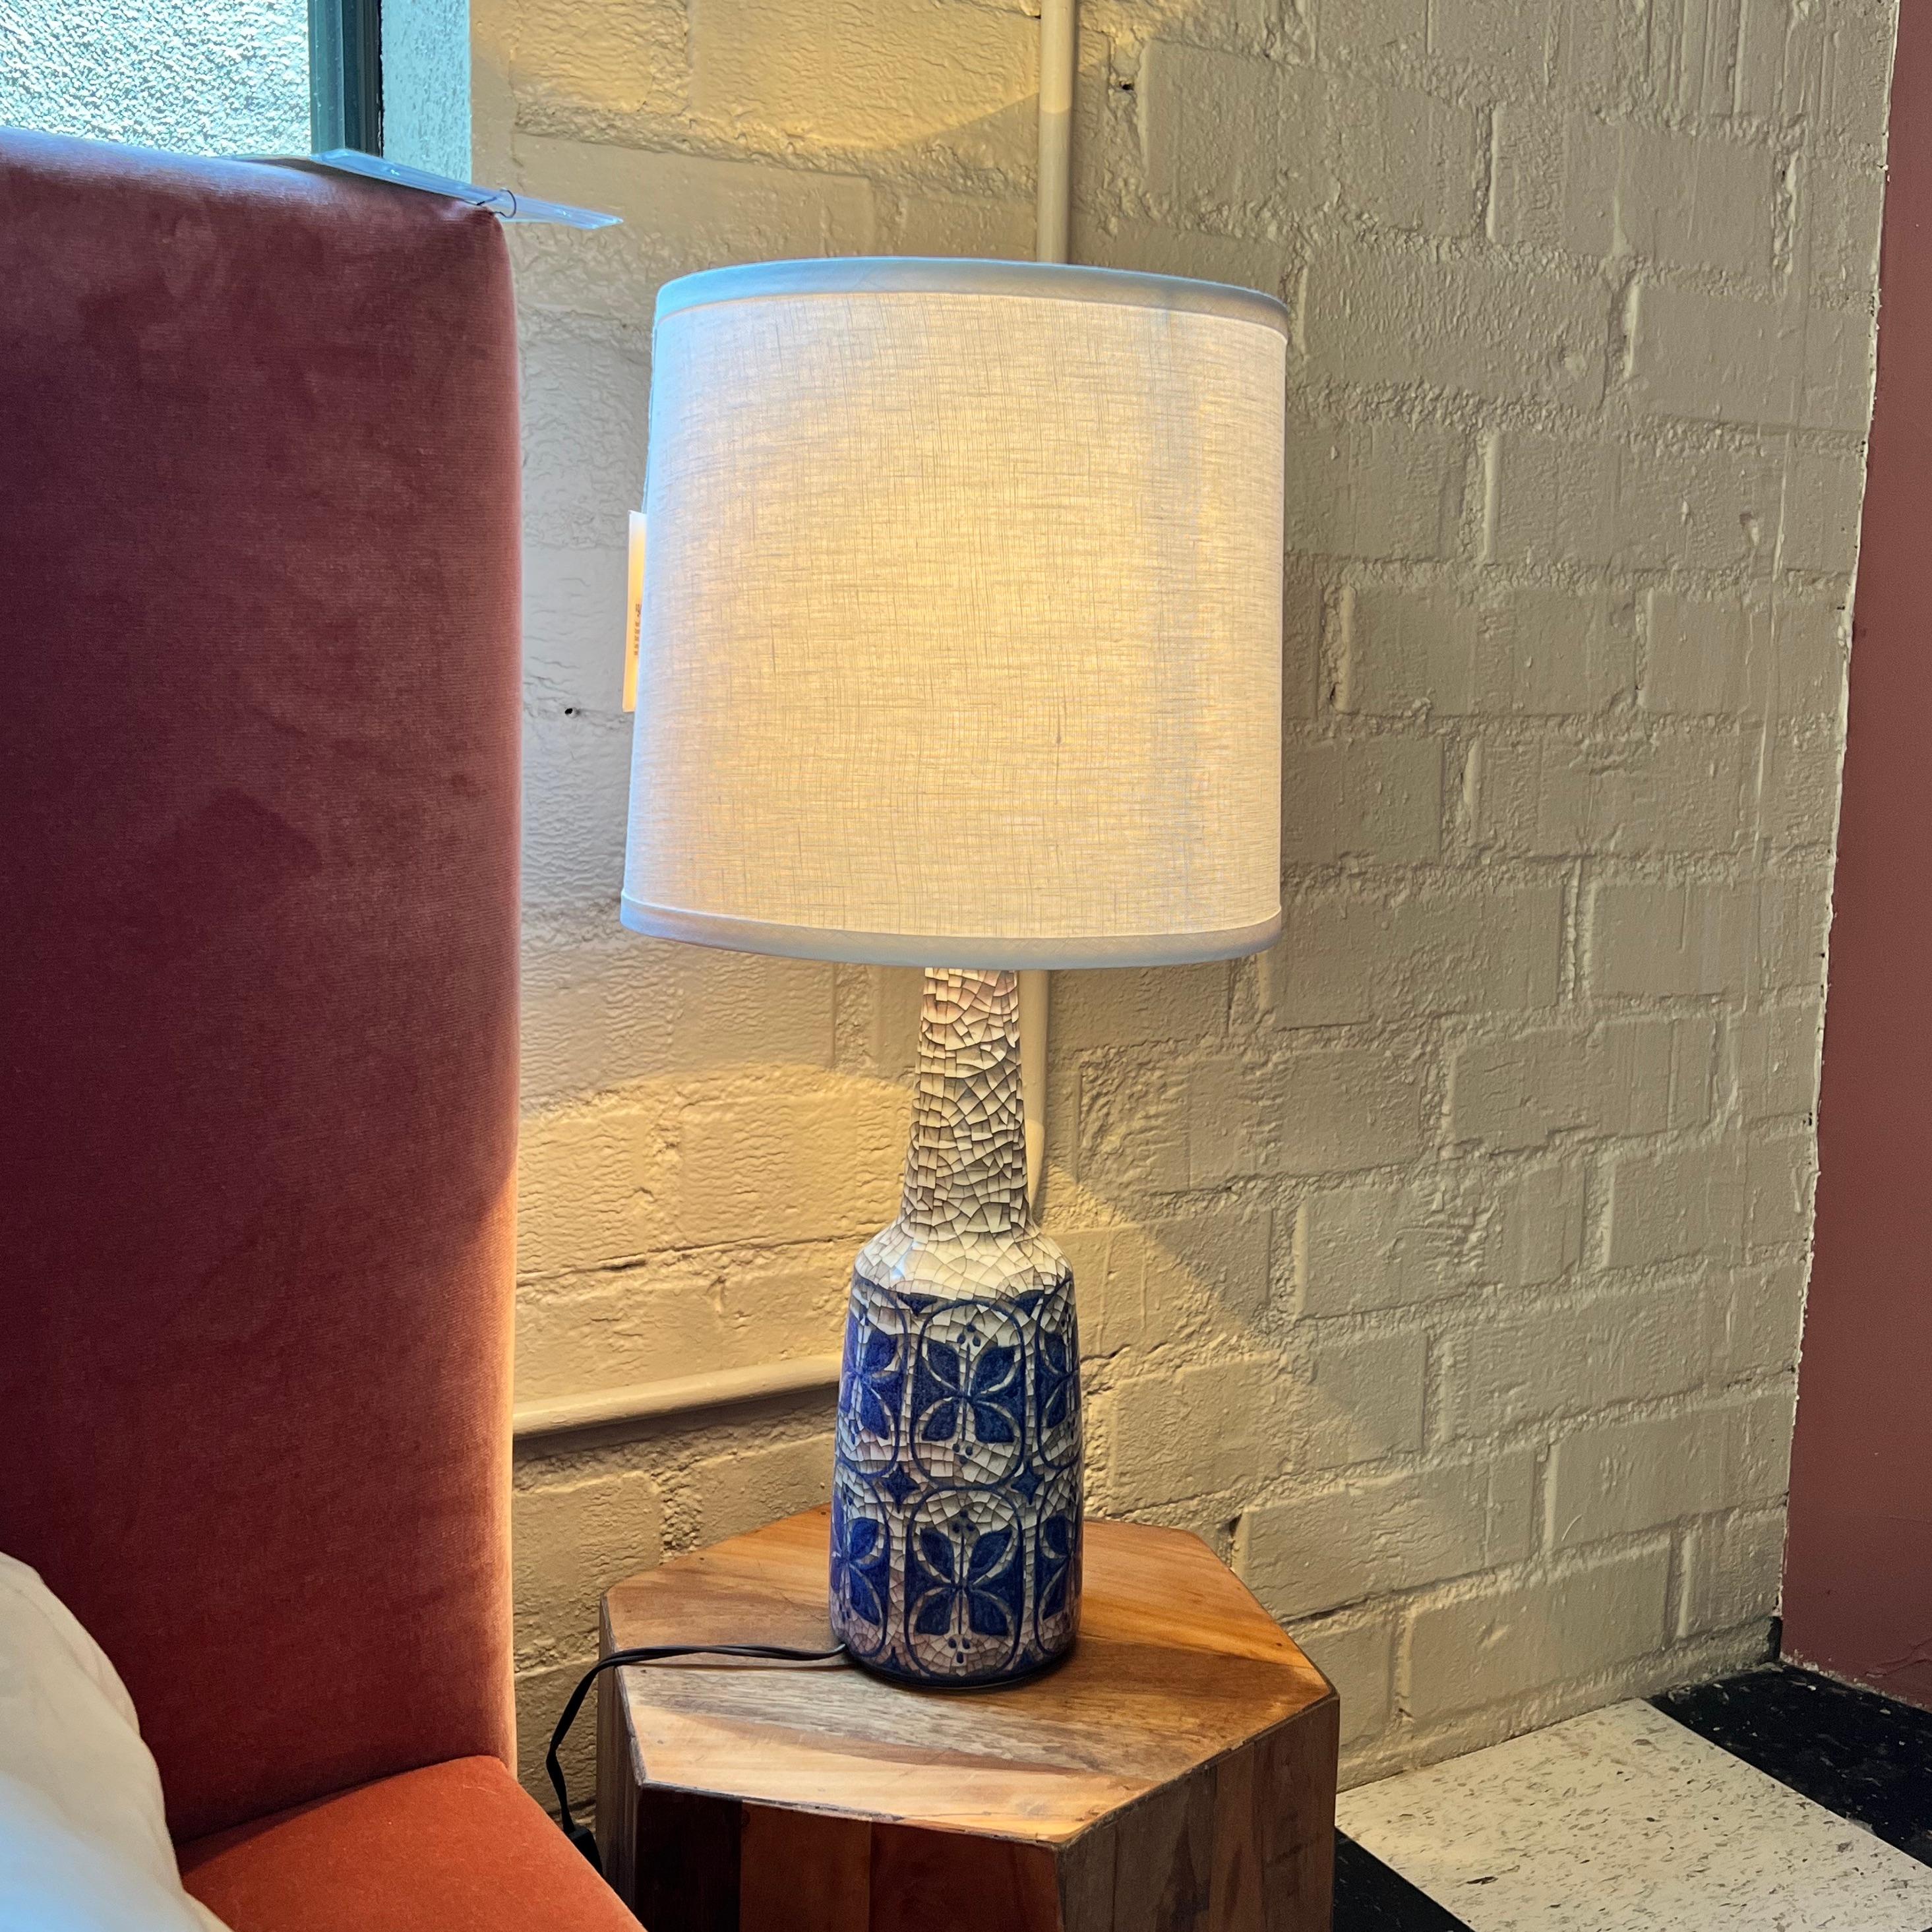 20th Century Hand Thrown Ceramic Midcentury Danish Lamp in Blue and White, Maker's Mark Ma&S For Sale